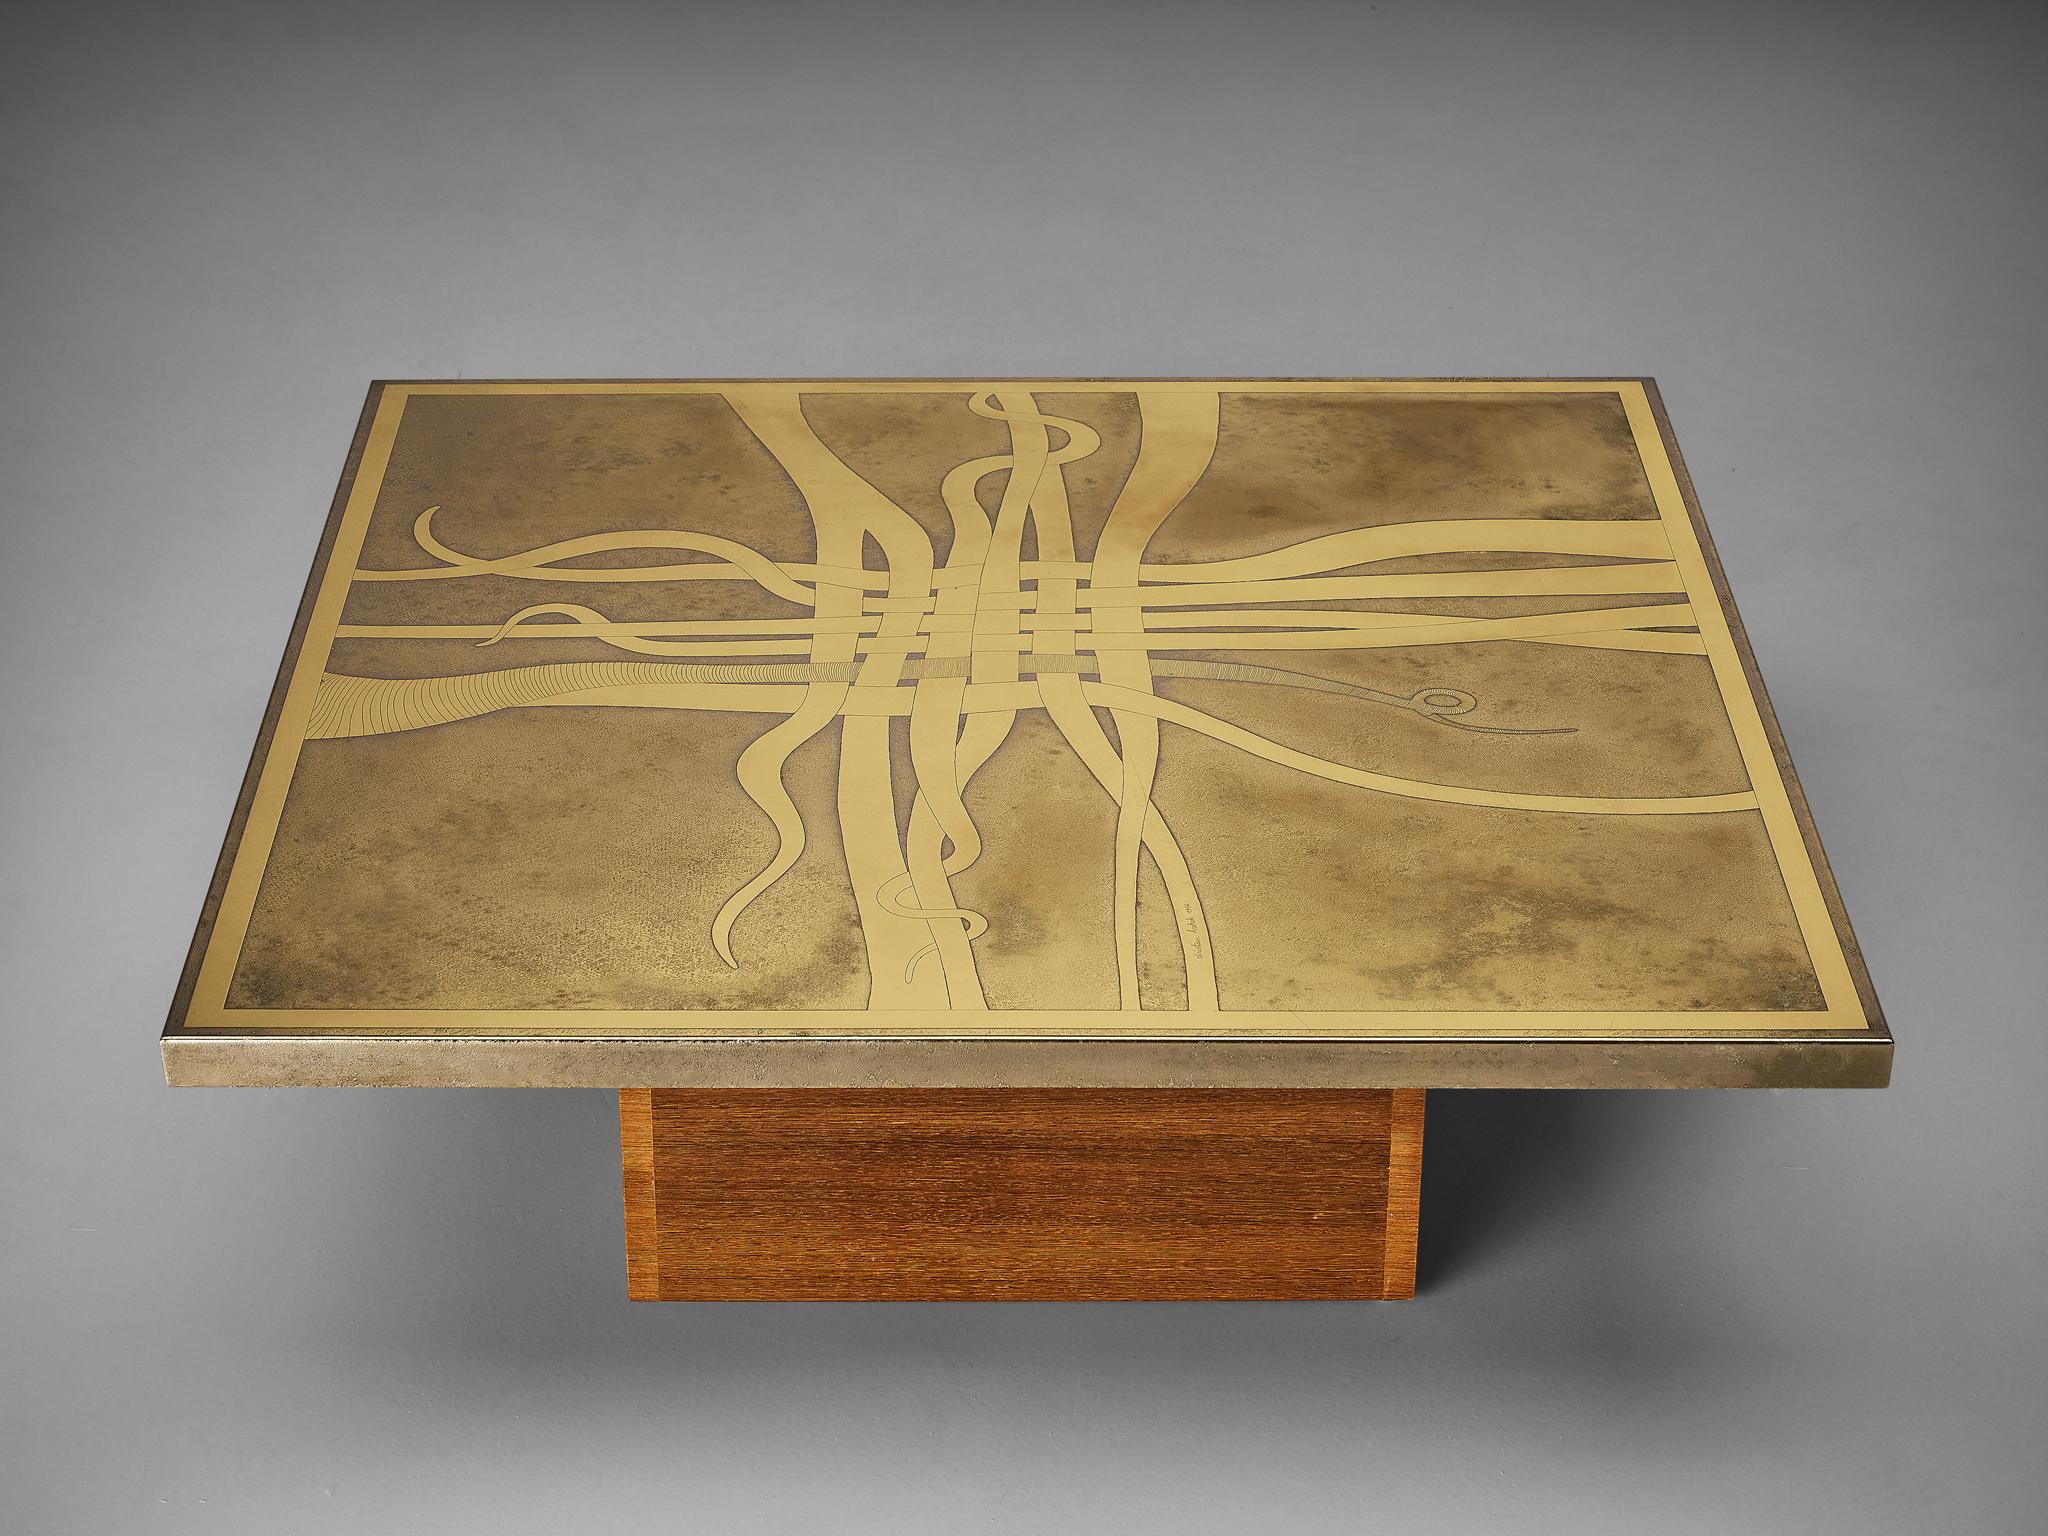 Christian Krekels, coffee table, brass, wengé, Belgium, 1976

Admirable coffee table with square tabletop in ornamented brass by Belgian designer Christian Krekels in 1976. It is a bold example of Belgium design of the 1970s. The patinated tabletop